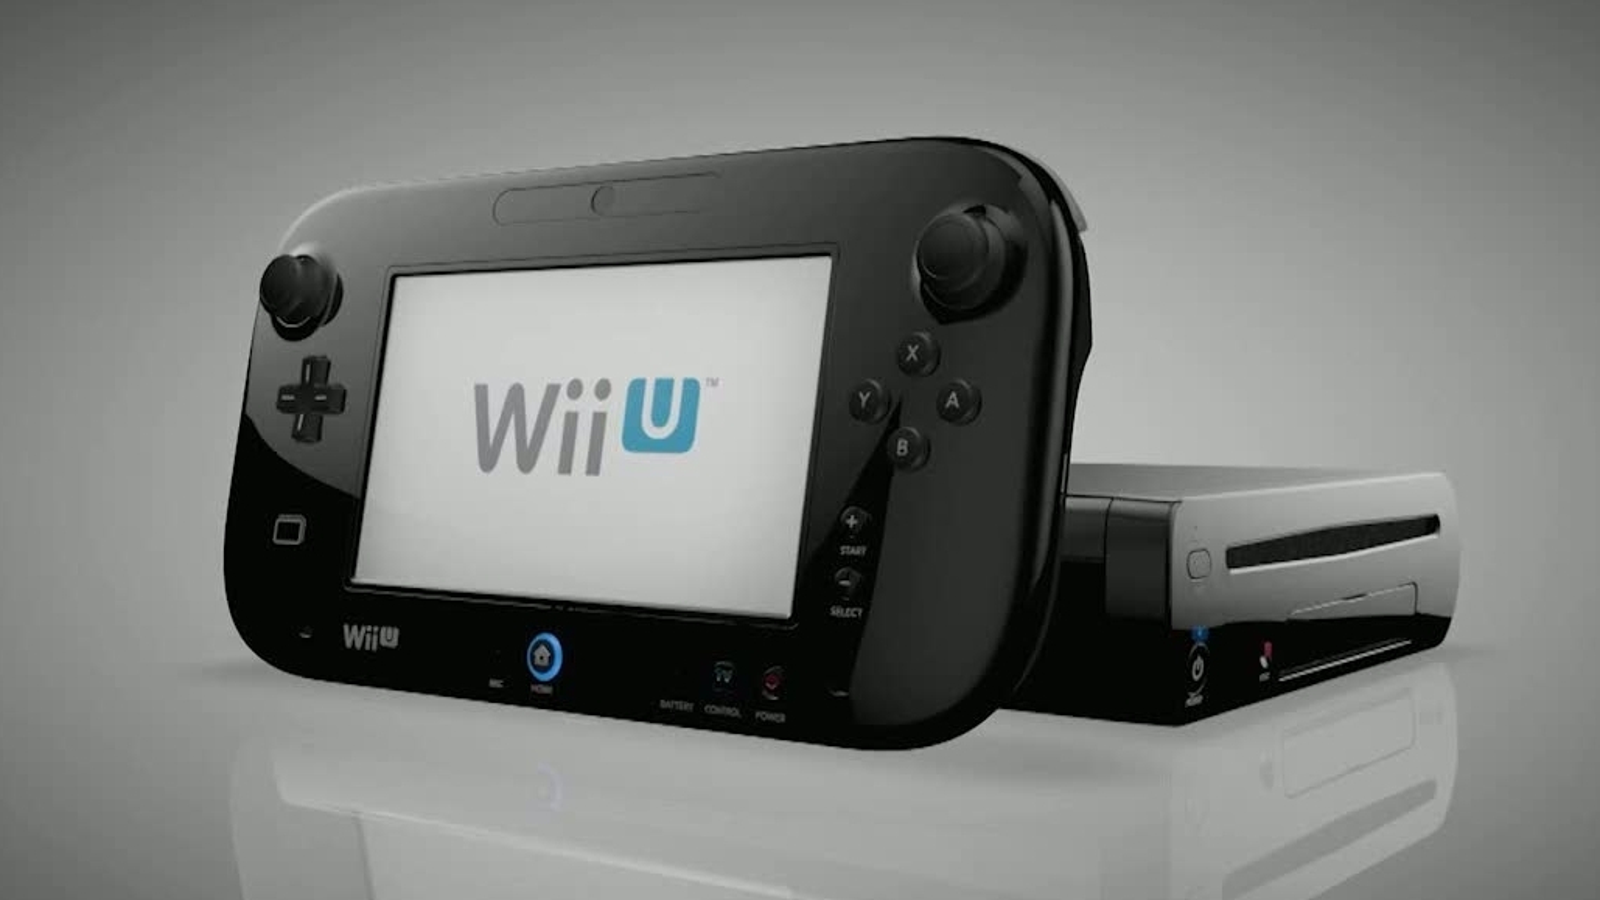 Nintendo to cease 3DS, Wii U eShop purchases next year 